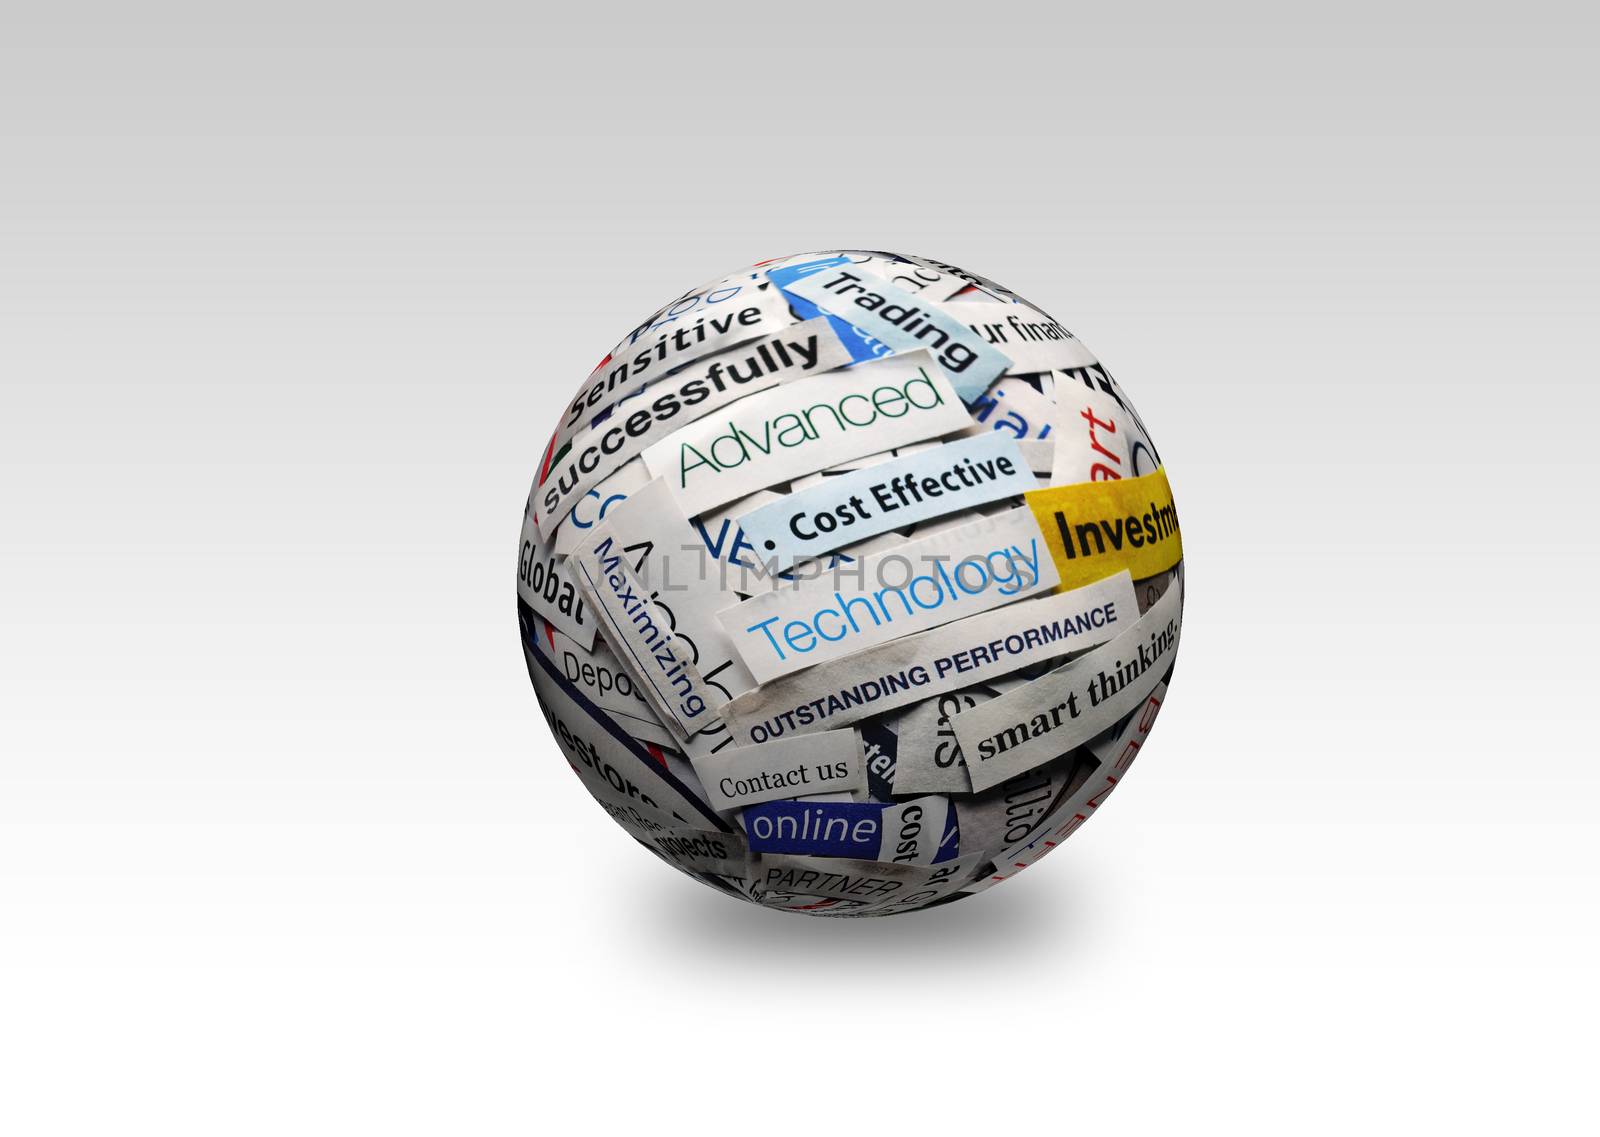 collage of paper headlines about the world economy on 3D sphere